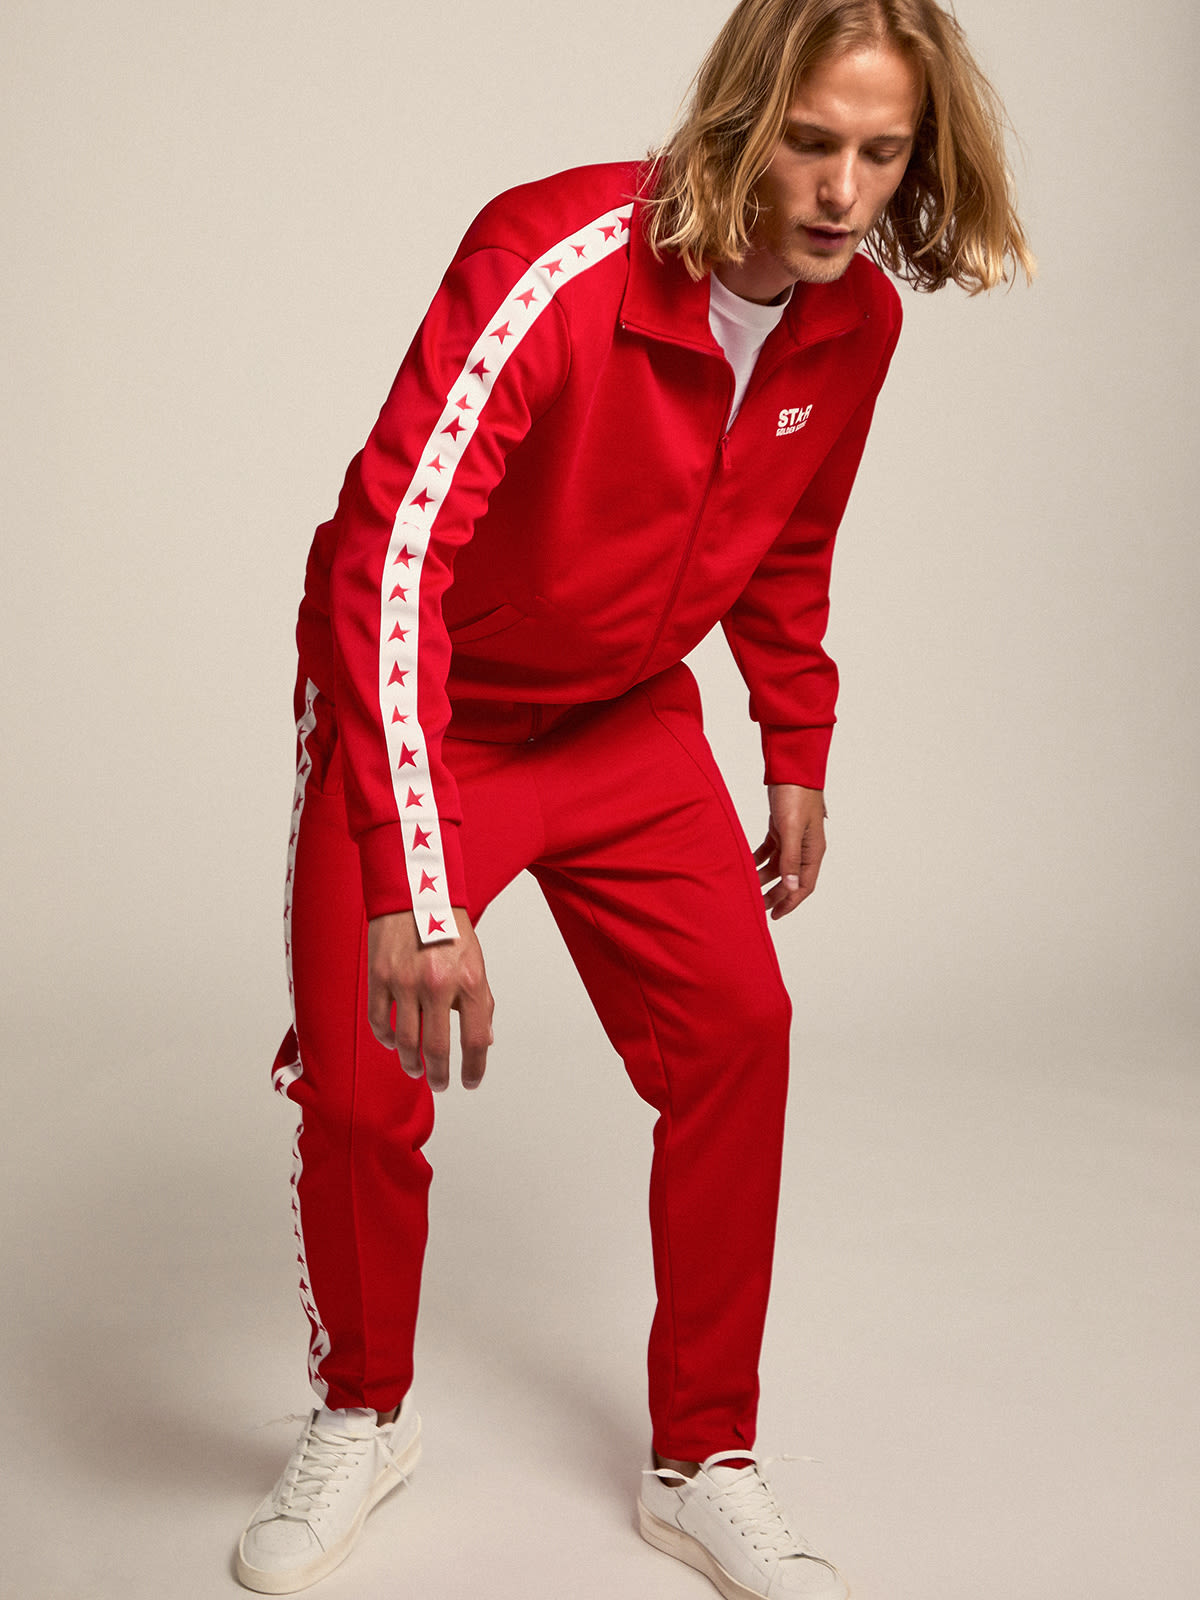 Golden Goose - Men’s red joggers with red stars on the sides in 